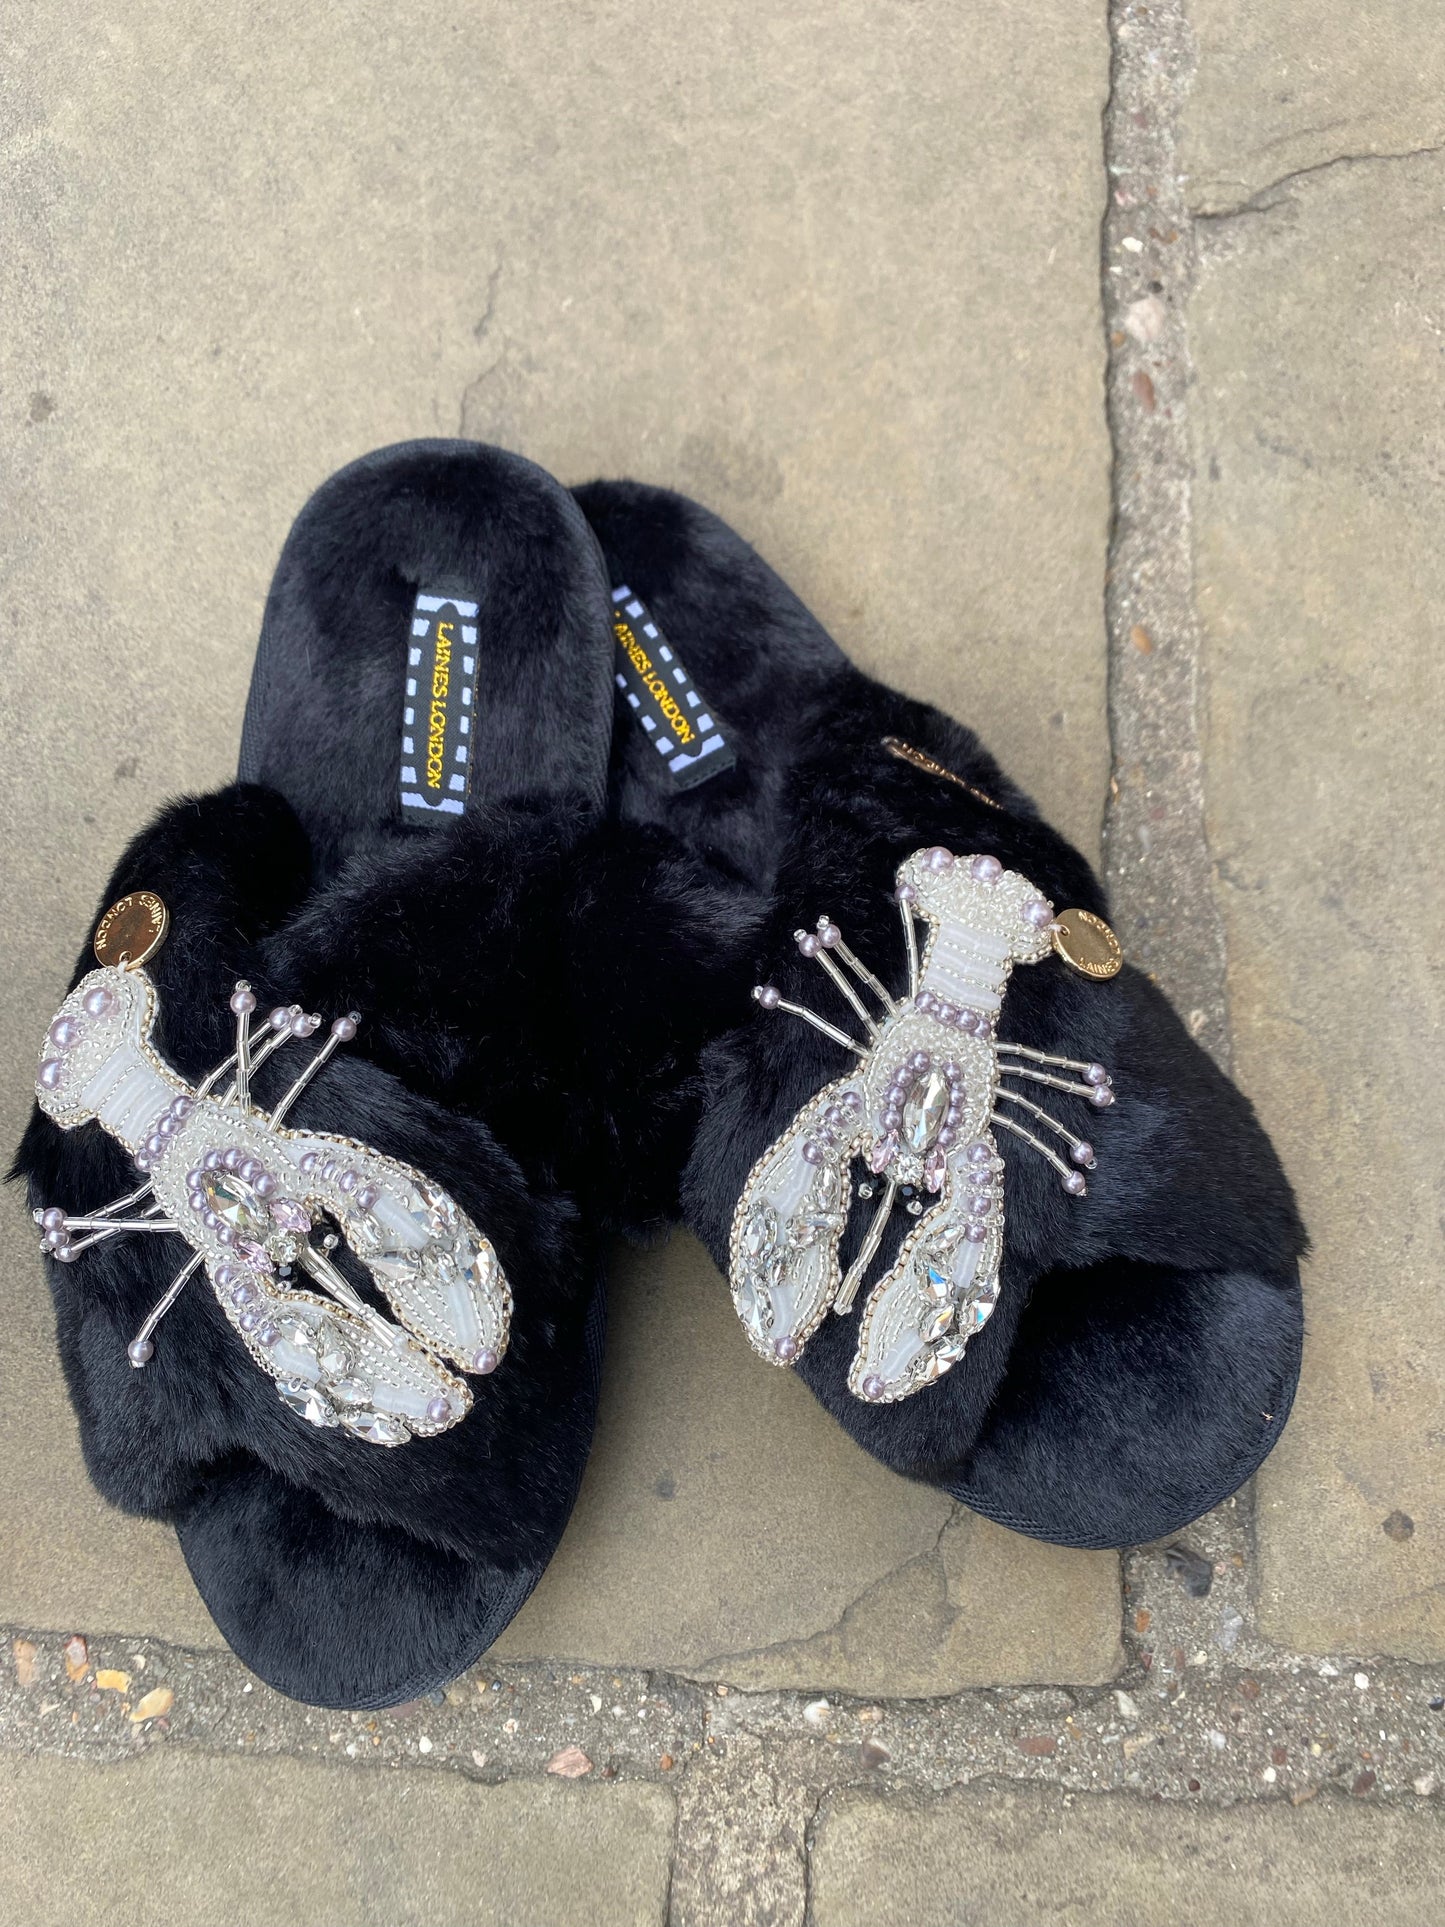 🖤Double Silver and Pearl Lobsters on Classic Black Slippers🖤